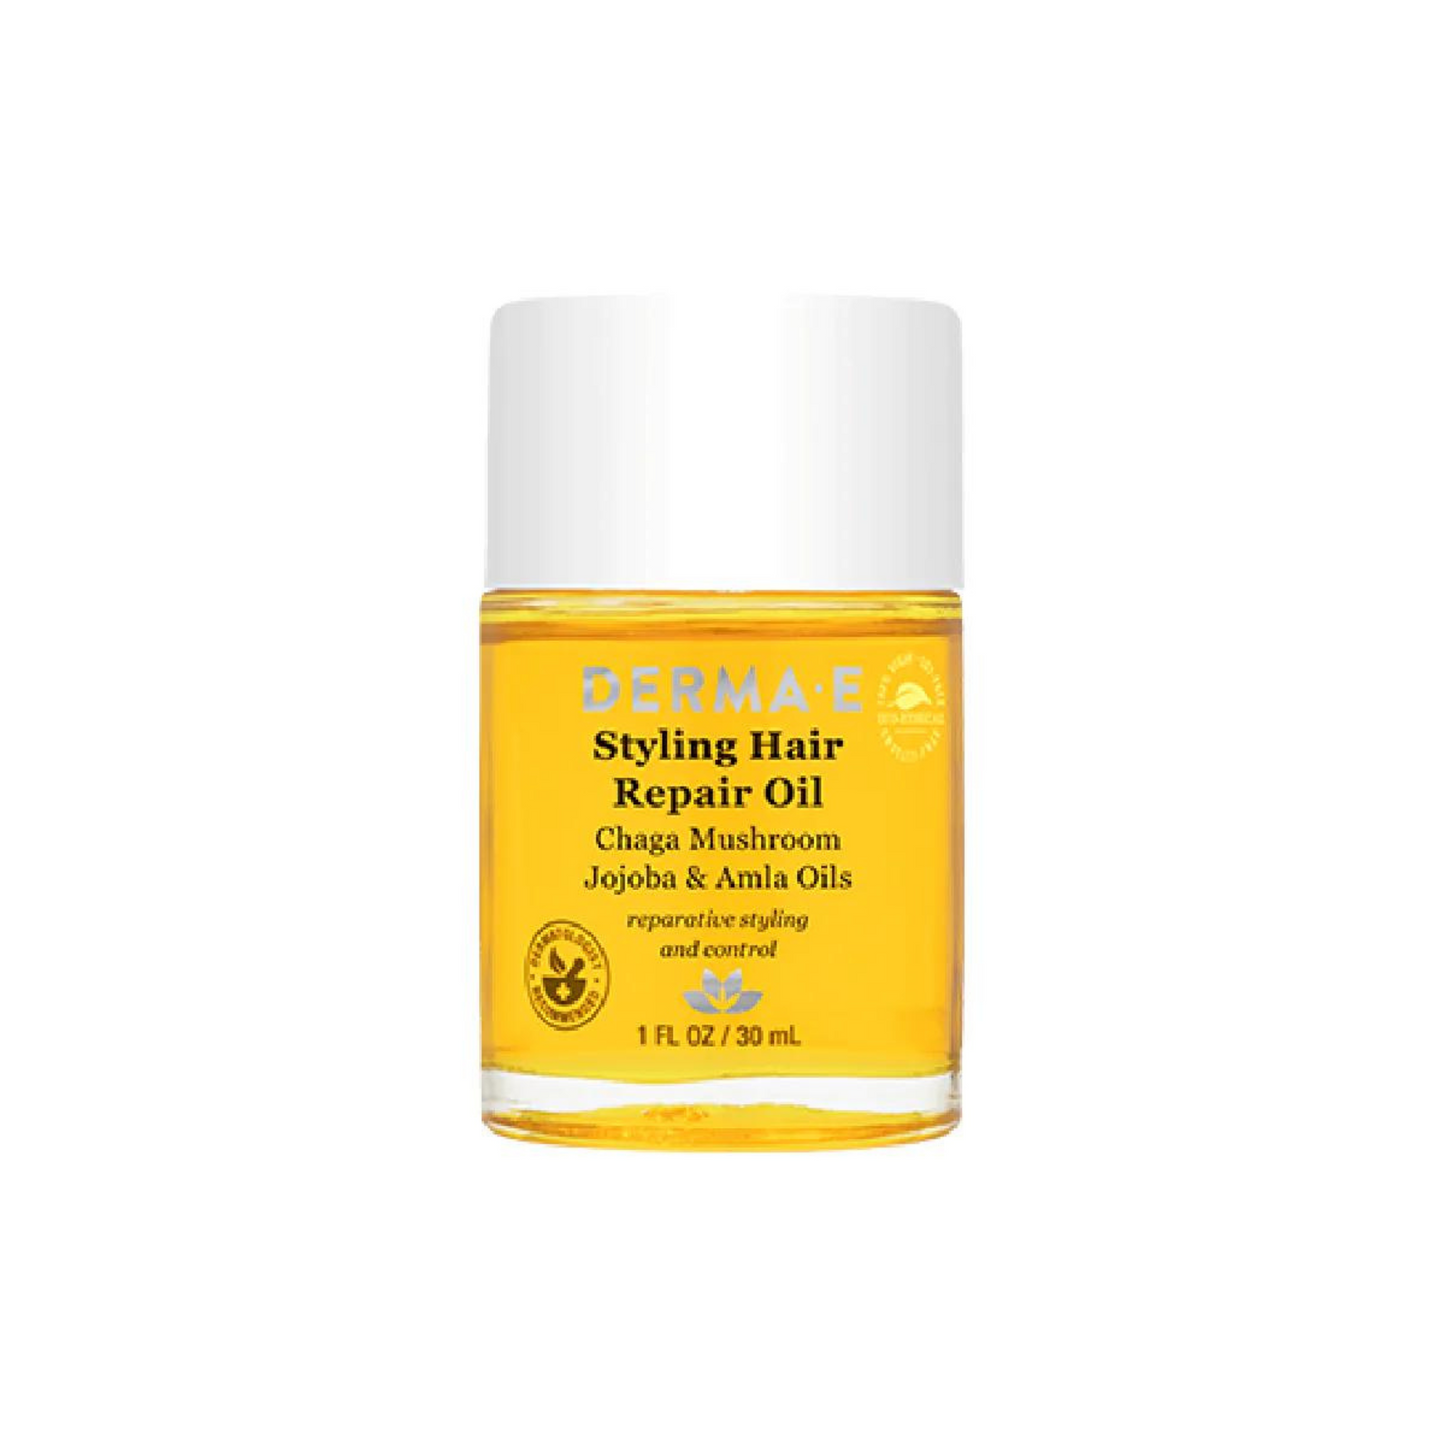 Primary Image of Styling Hair Oil